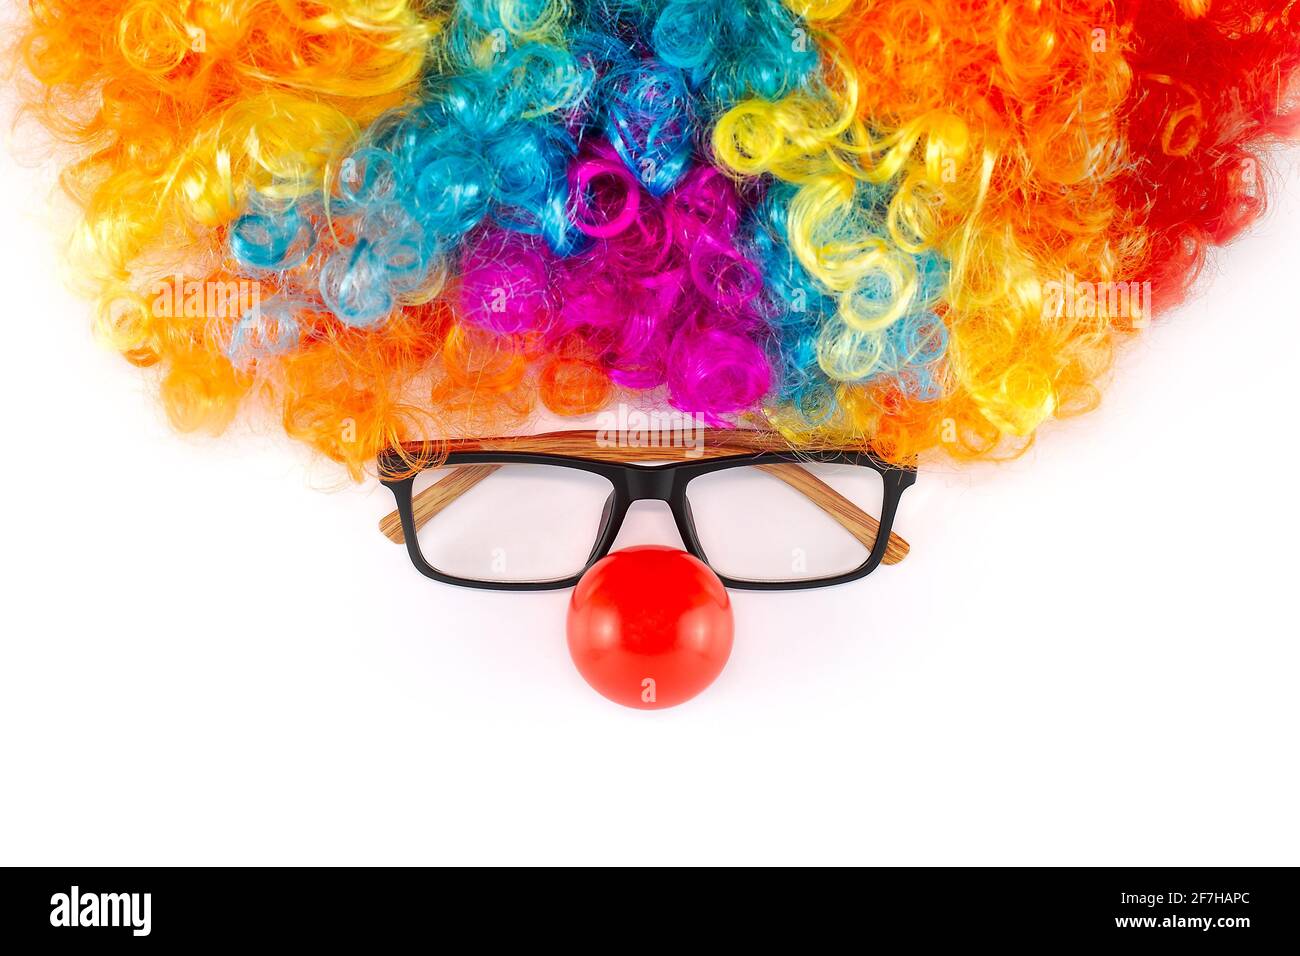 Funny Party concept face formed. Rainbow Clown Wig Set with glasses and red clown nose like a face, Fluffy Afro Synthetic Cosplay Anime Fancy Wigs Fes Stock Photo